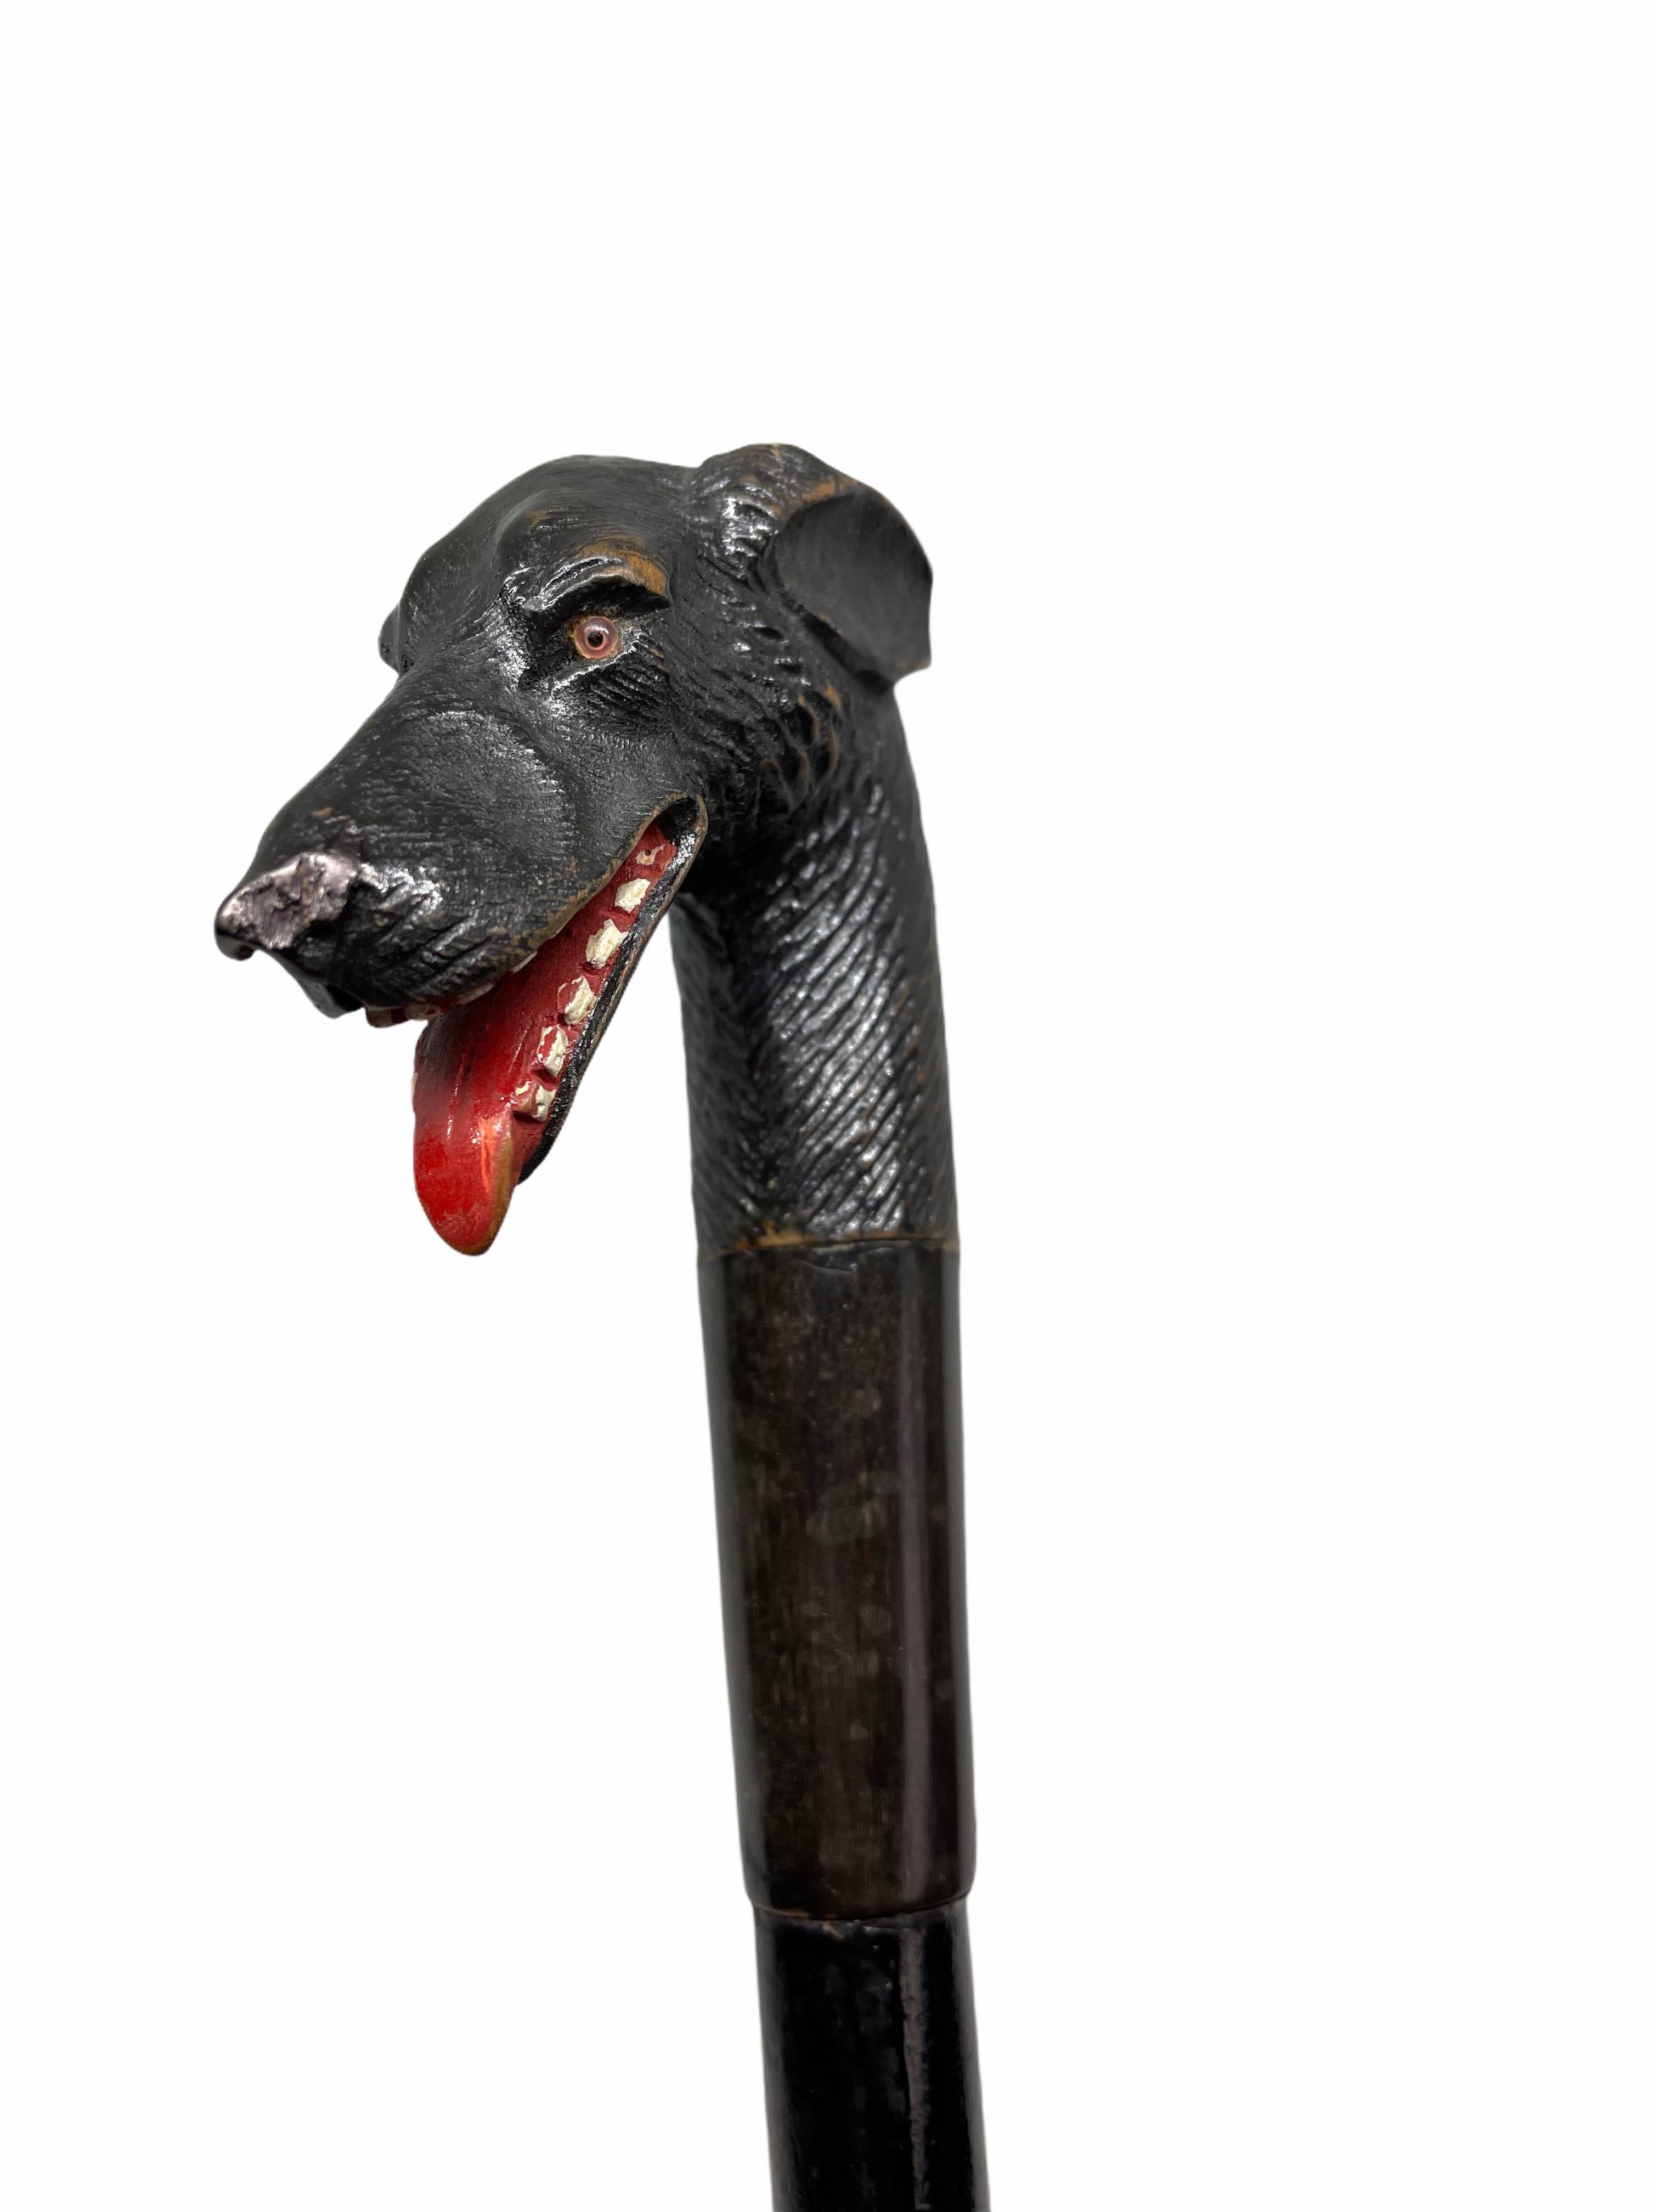 Classic early 1910s Black Forest Brienz wood carved umbrella with handle in form of a dog. The dog has glass eyes. Nice addition to your collection or just for use. Made of hand carved wood and fabric by Umbrella manufactory Huber Schirm in Vienna